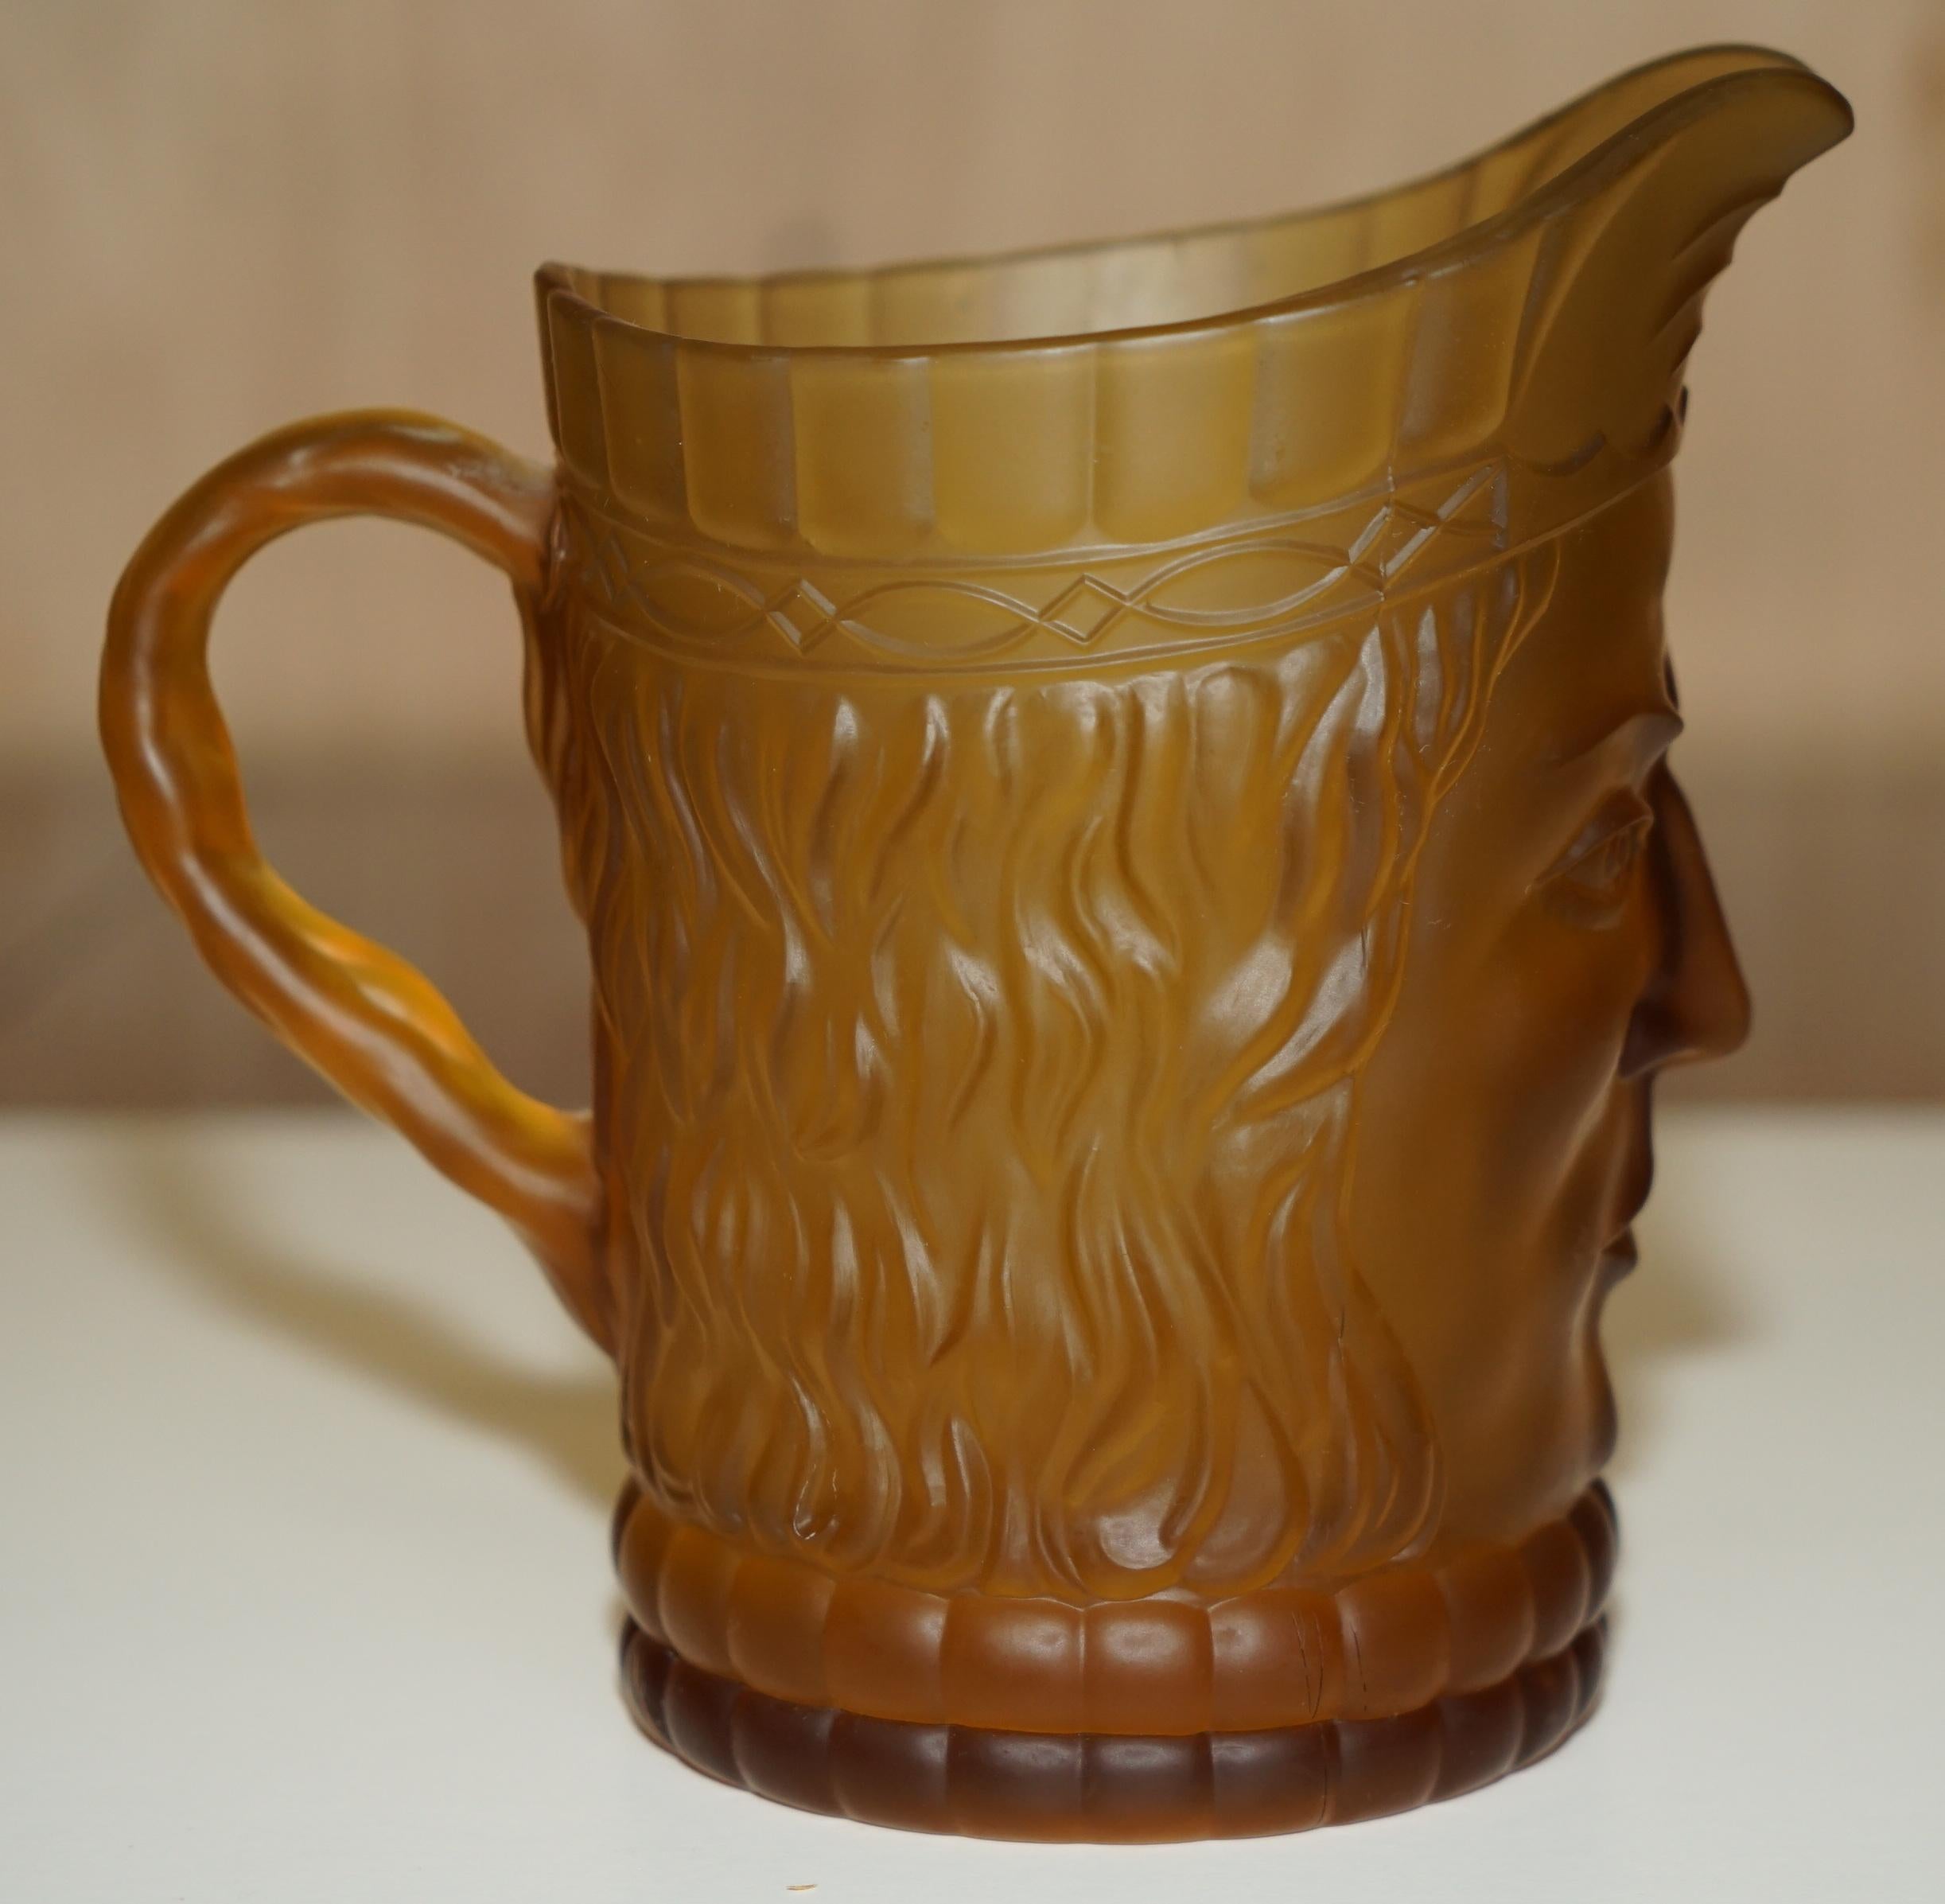 Hand-Crafted VINTAGE ART DECO CIRCA 1920'S AMBER FACE GLASS CUP SET WITH LARGE PiTCHER JUG For Sale